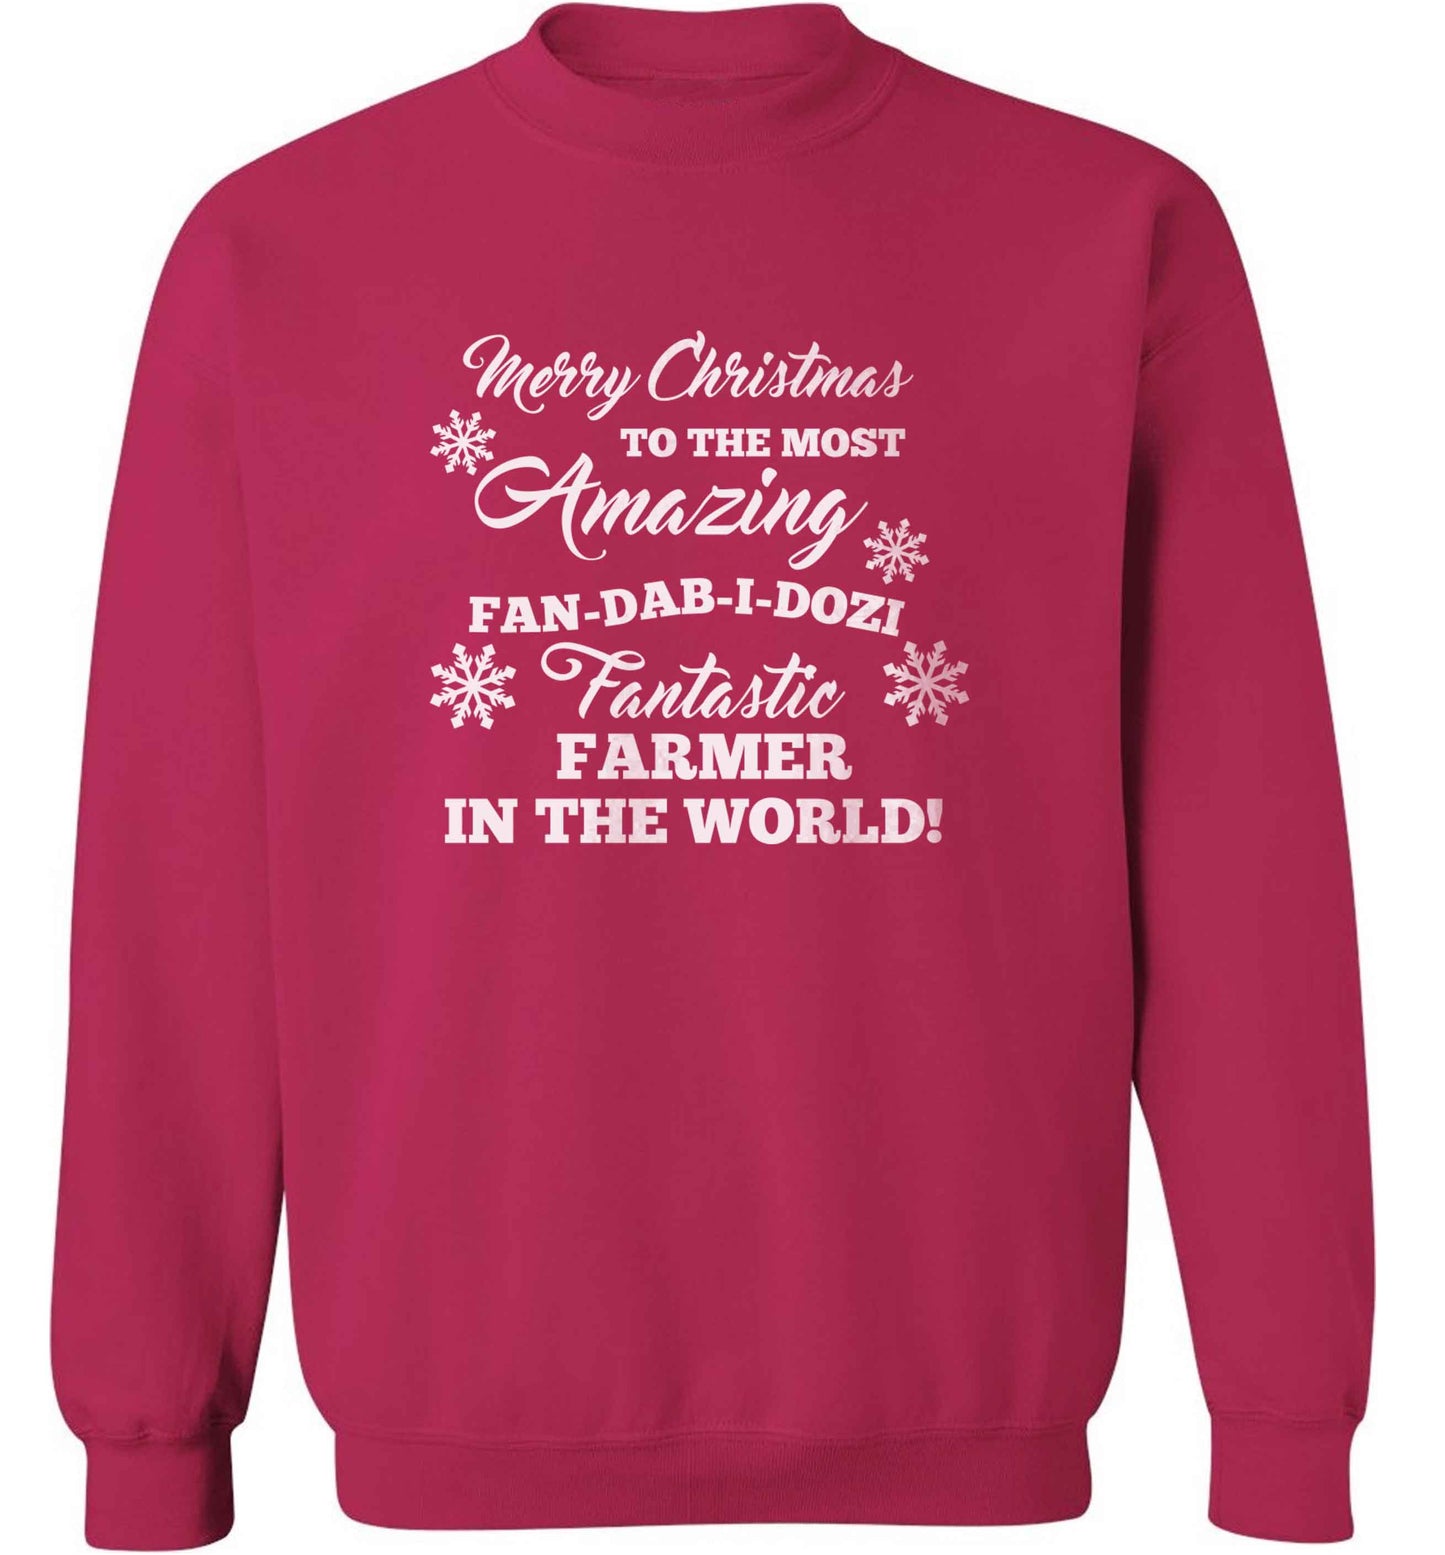 Merry Christmas to the most amazing farmer in the world! adult's unisex pink sweater 2XL